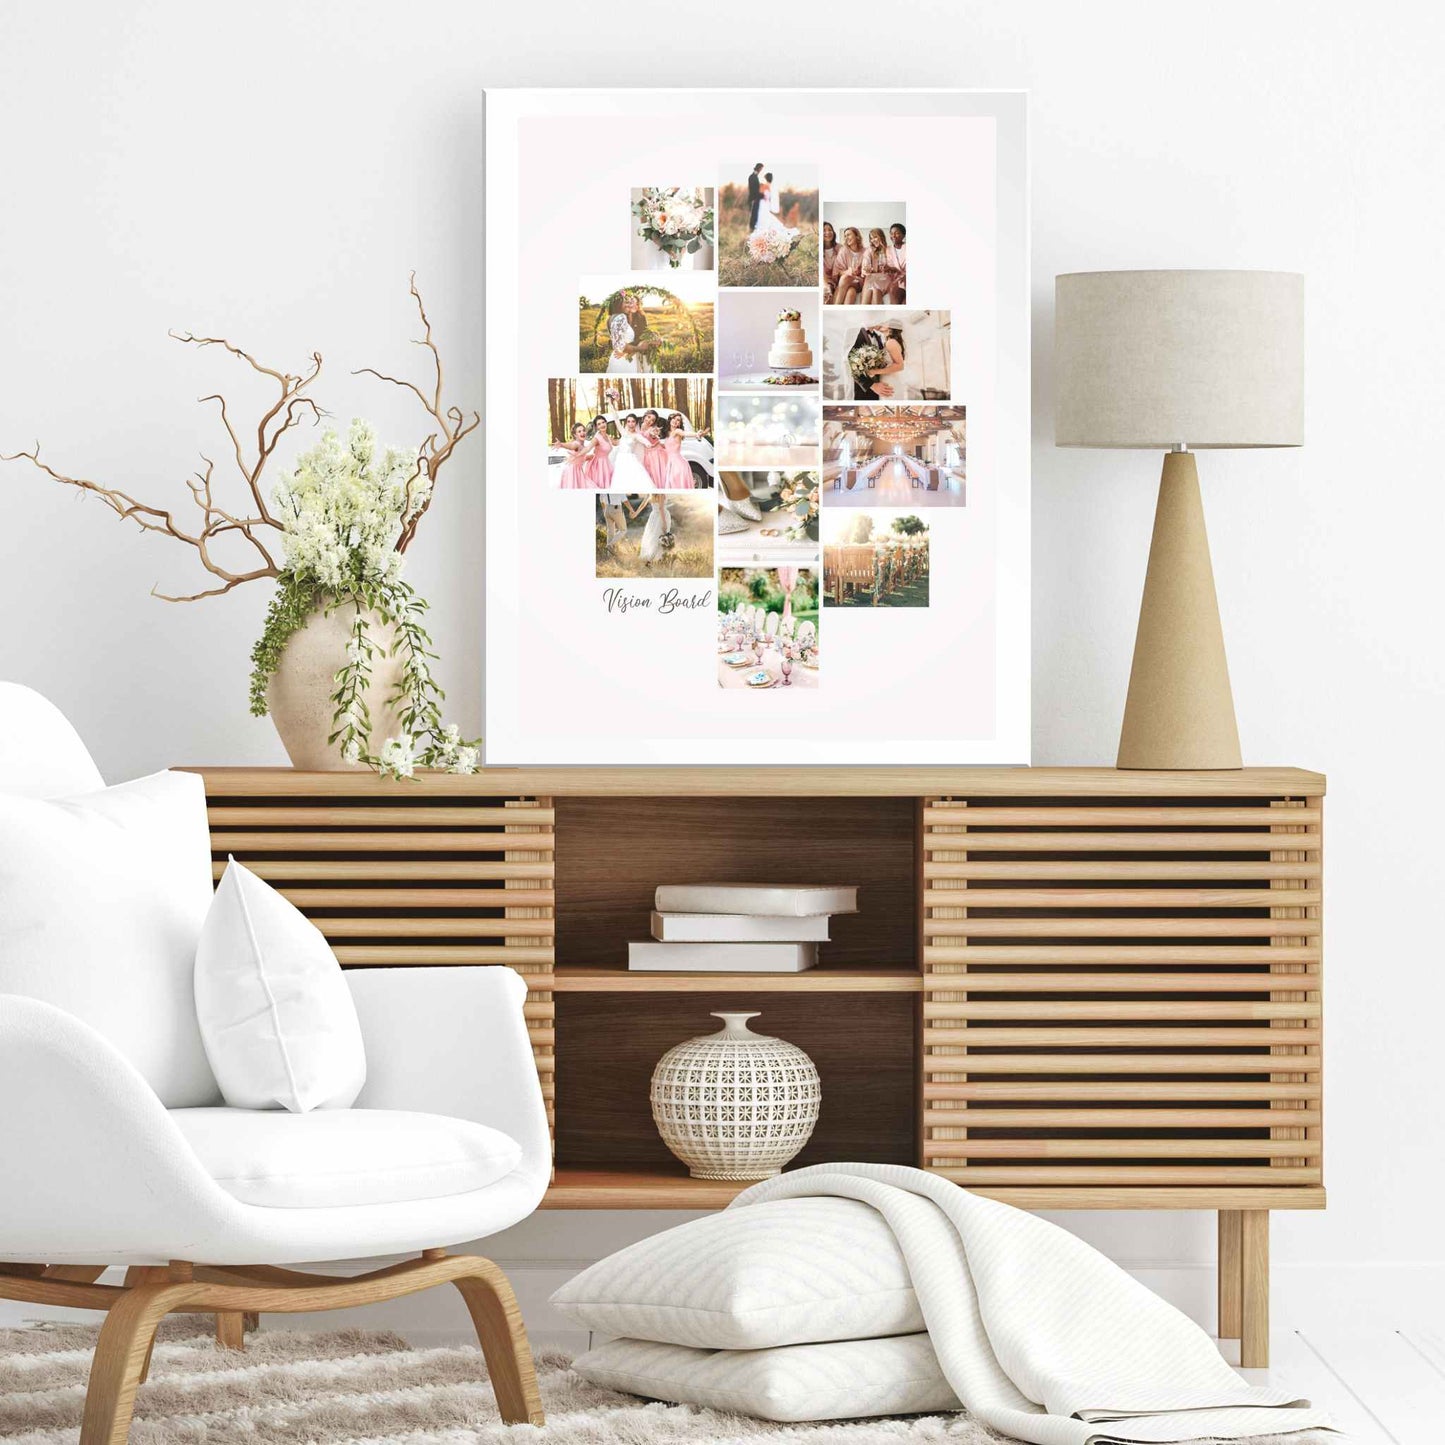 Modern mood board style vision board design in frame on wall in modern interior room